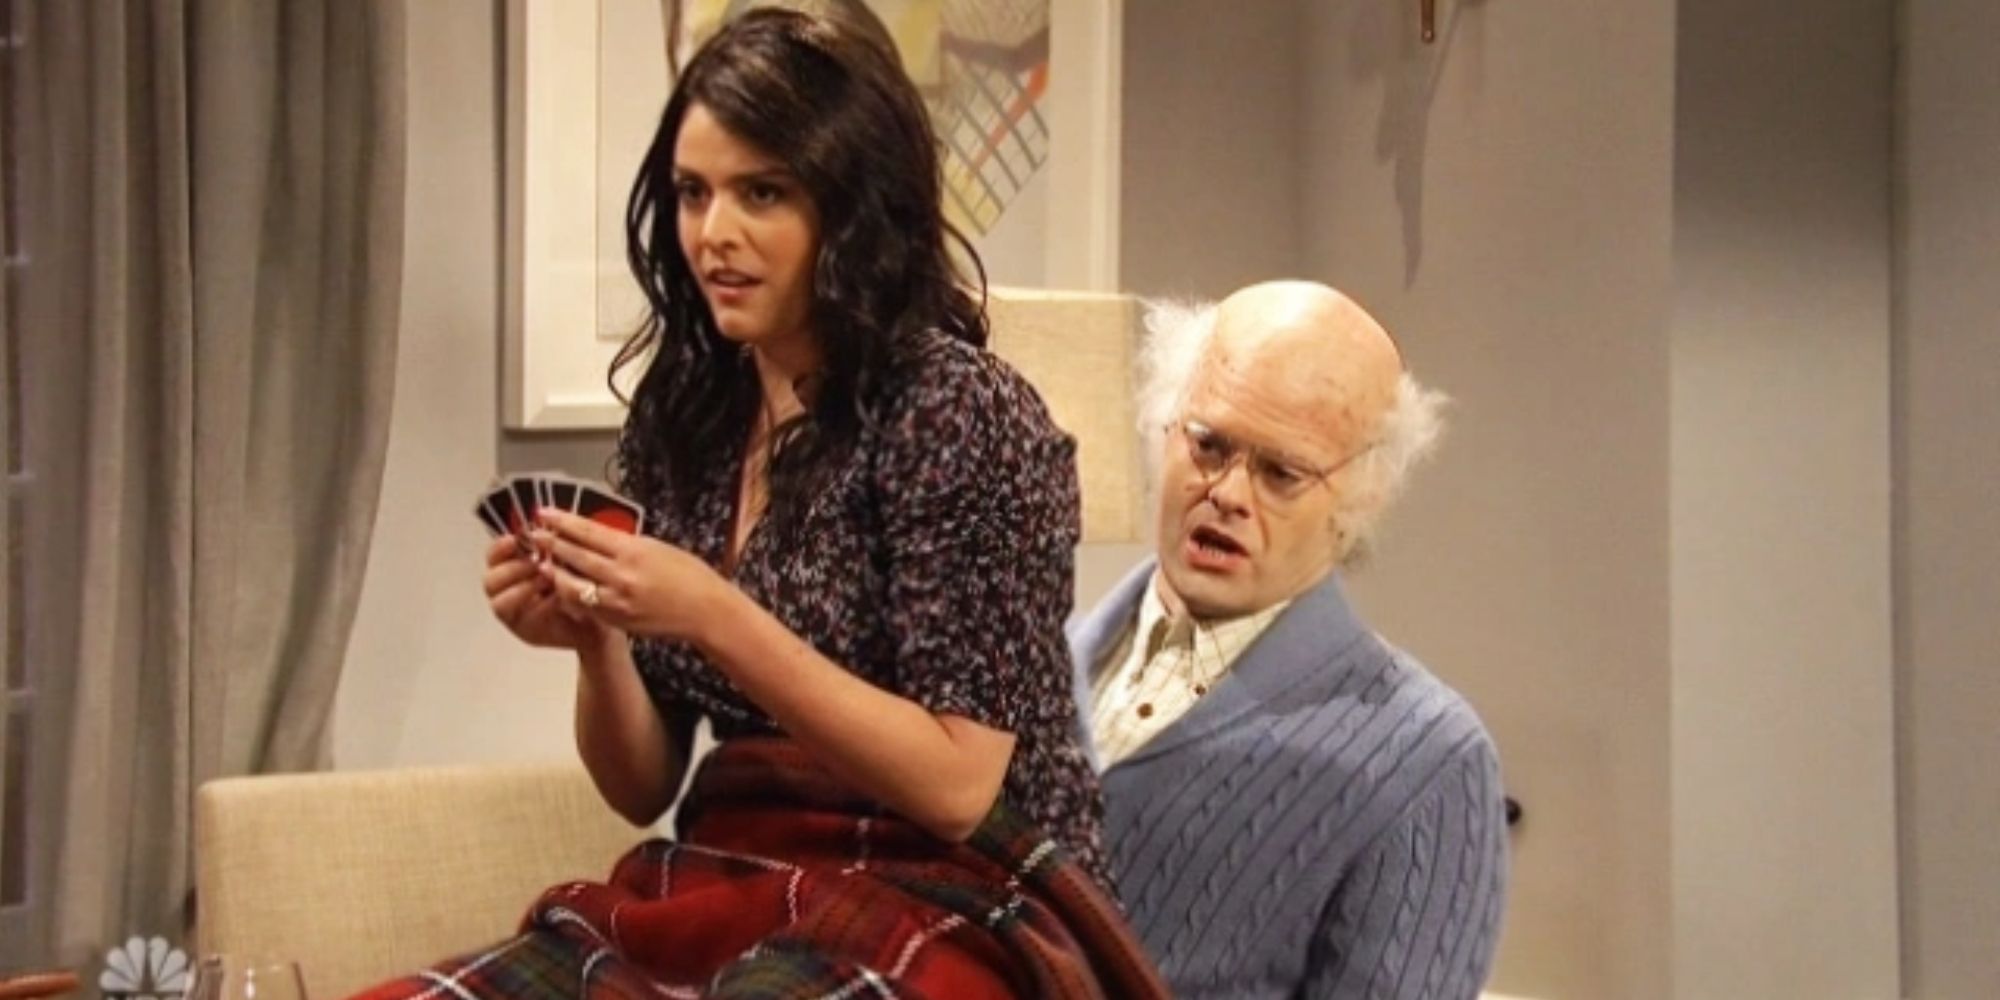 Cecily Strong as Genie on SNL